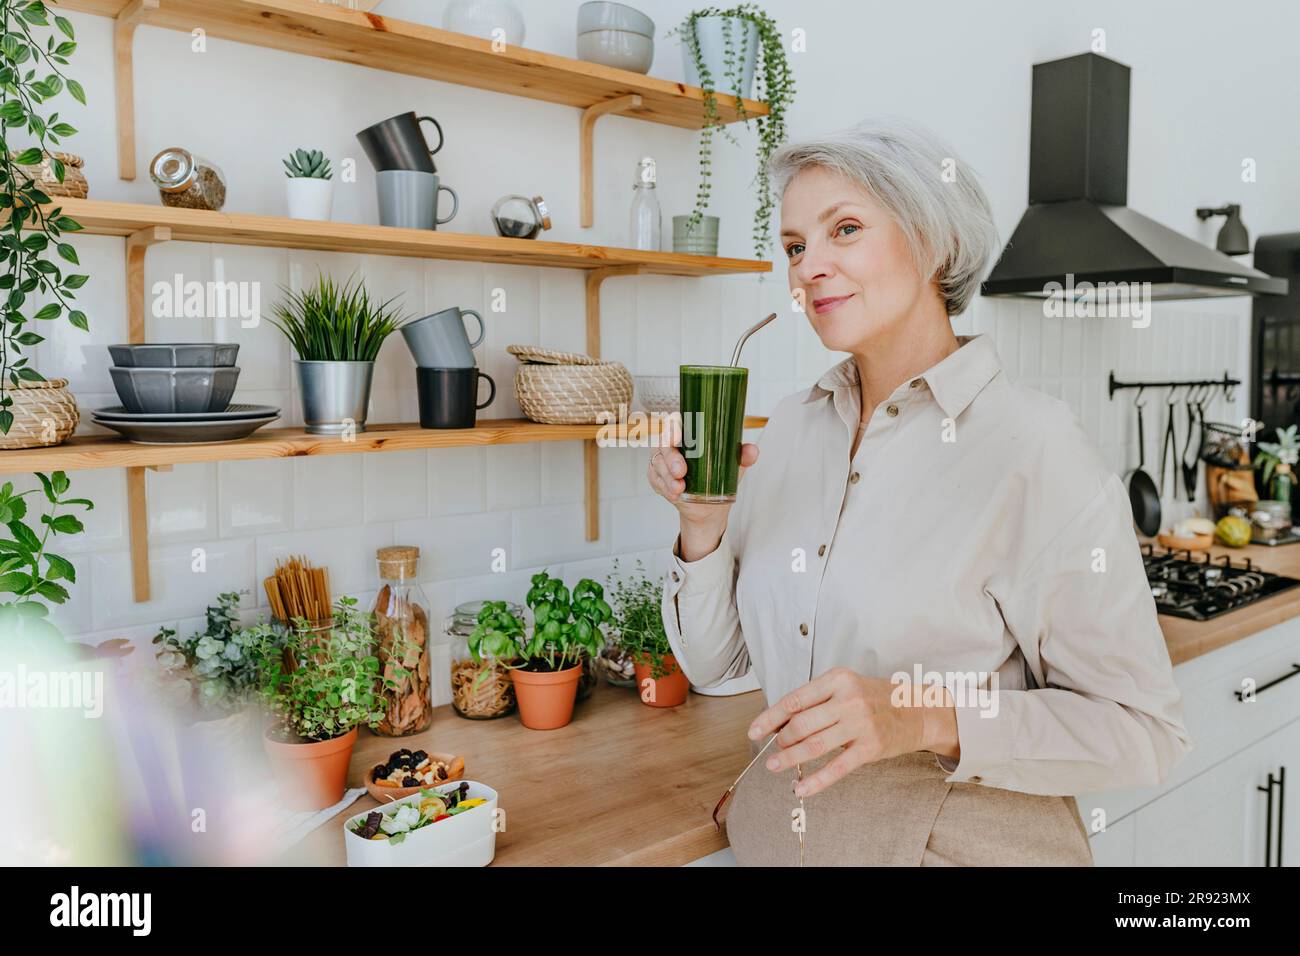 Smiling woman drinking detox juice in kitchen at home Stock Photo